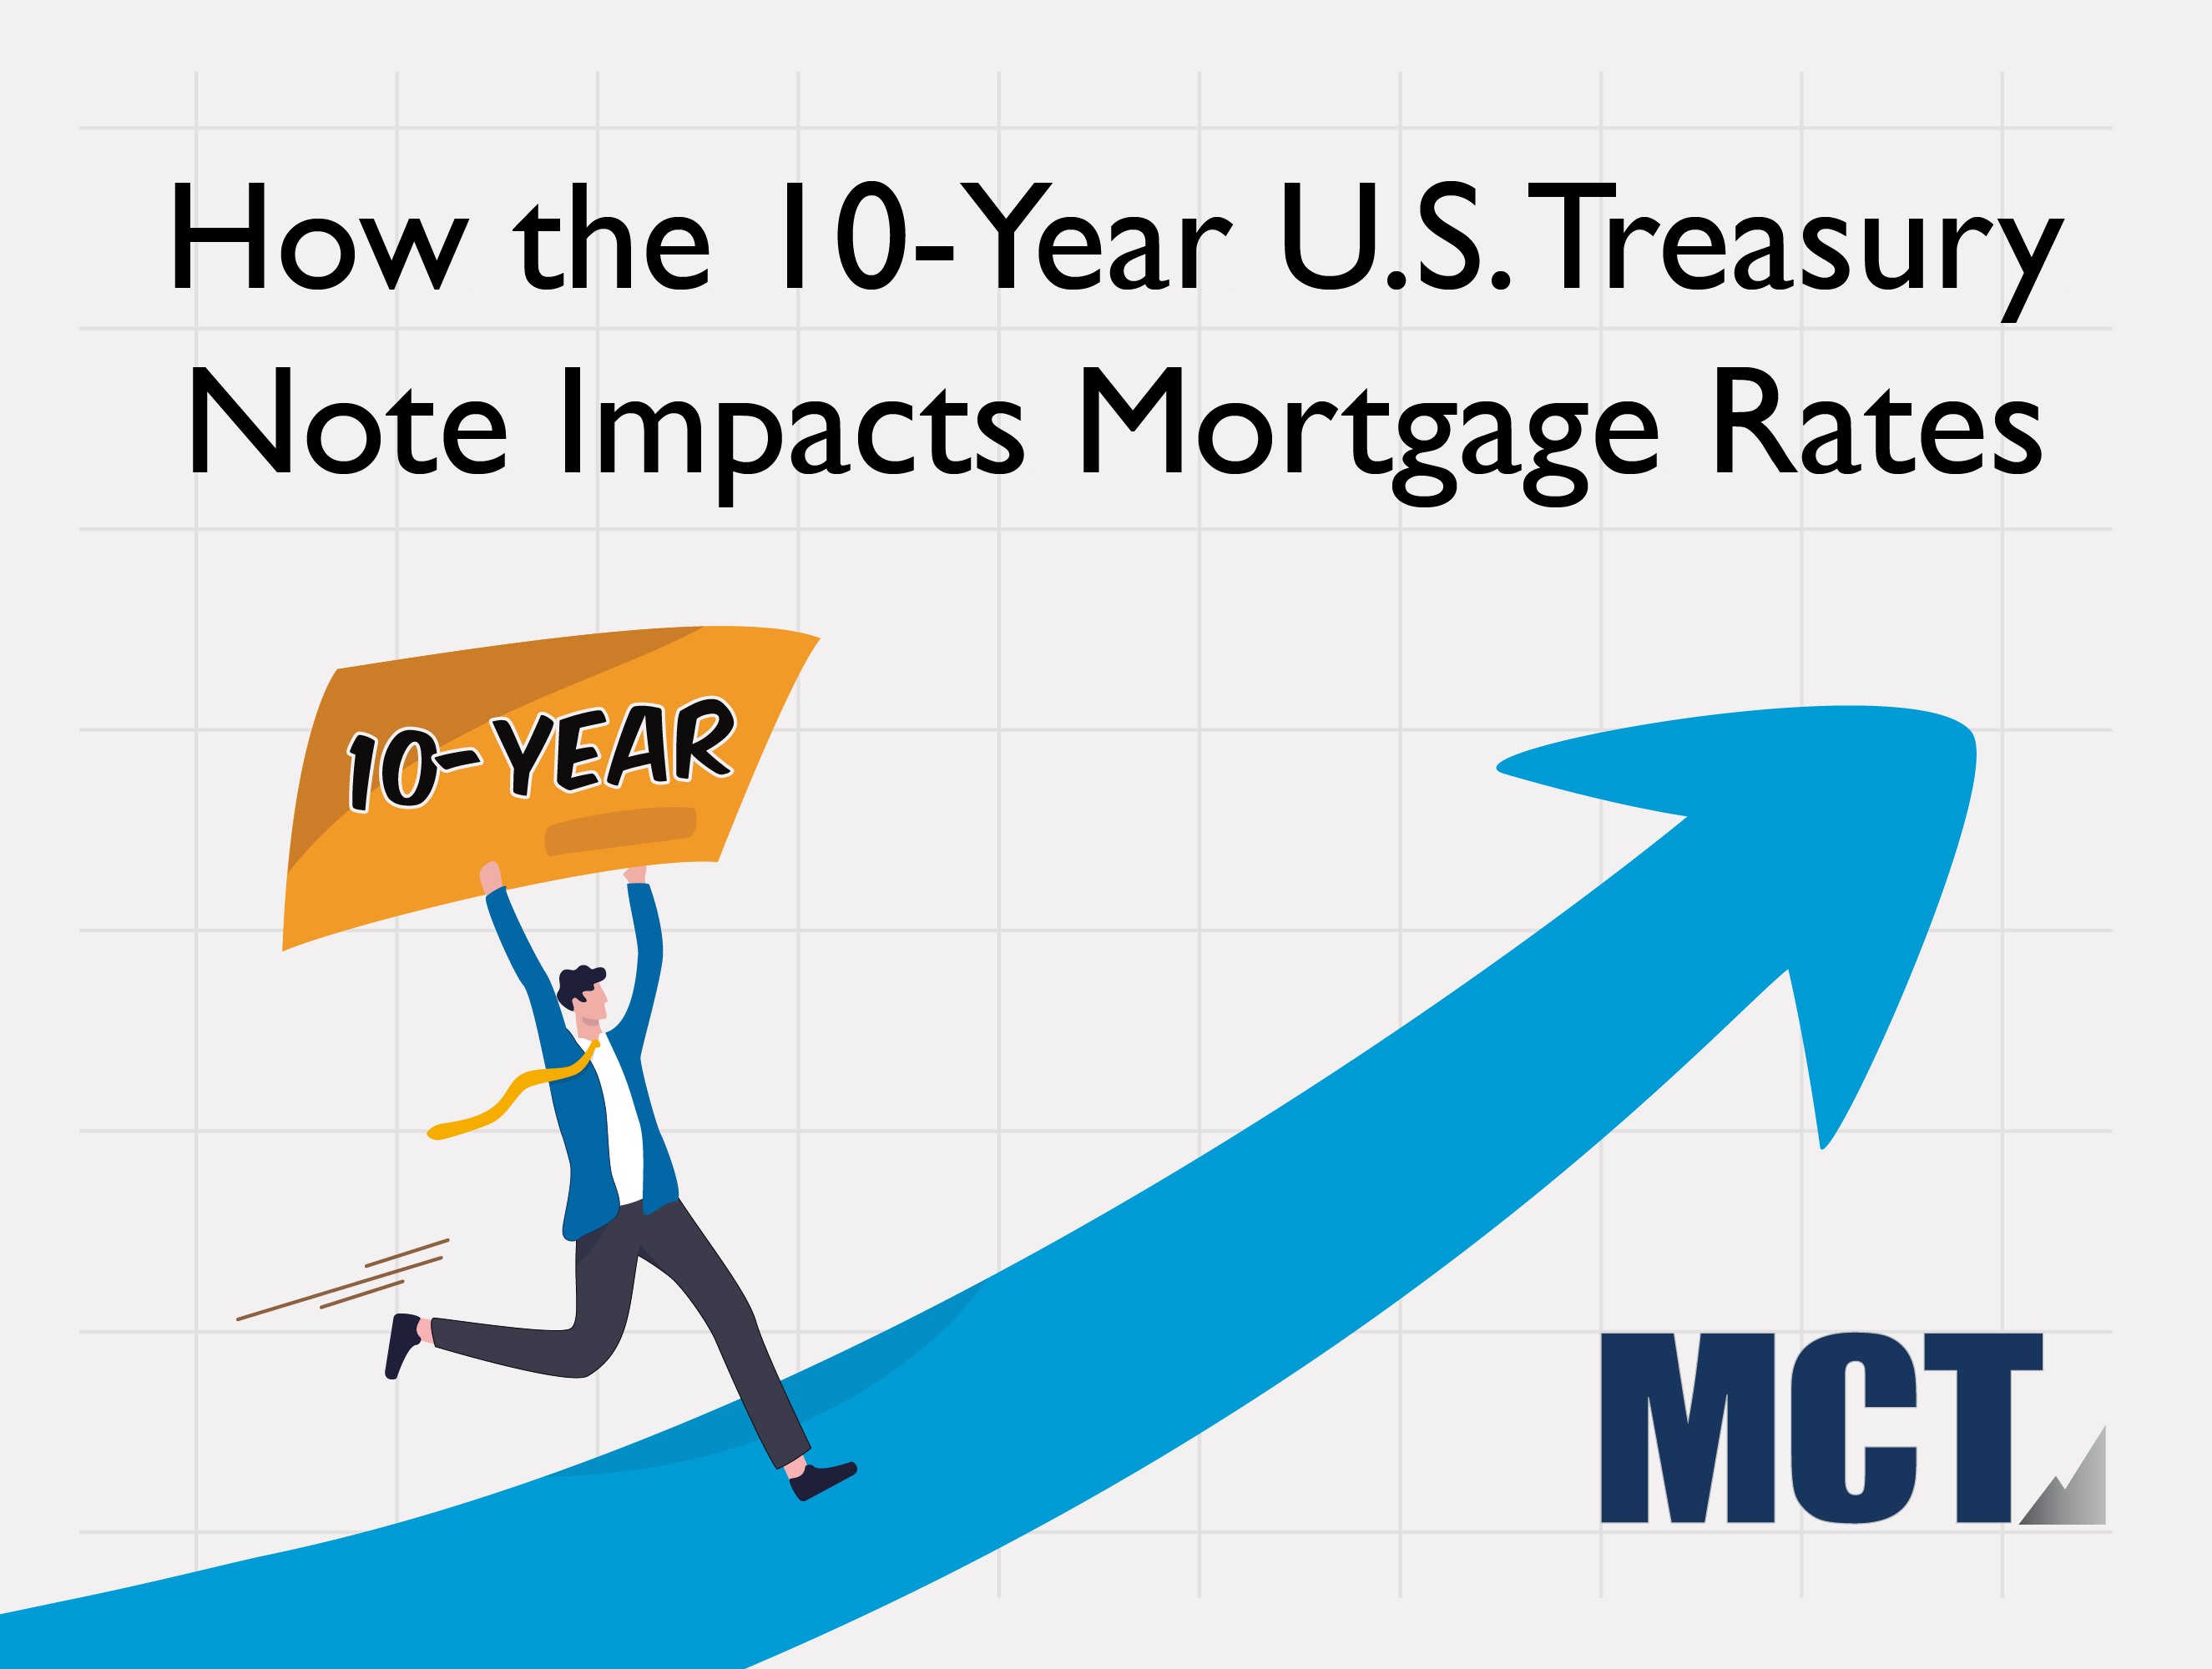 How The 10-Year U.S. Treasury Note Impacts Mortgage Rates